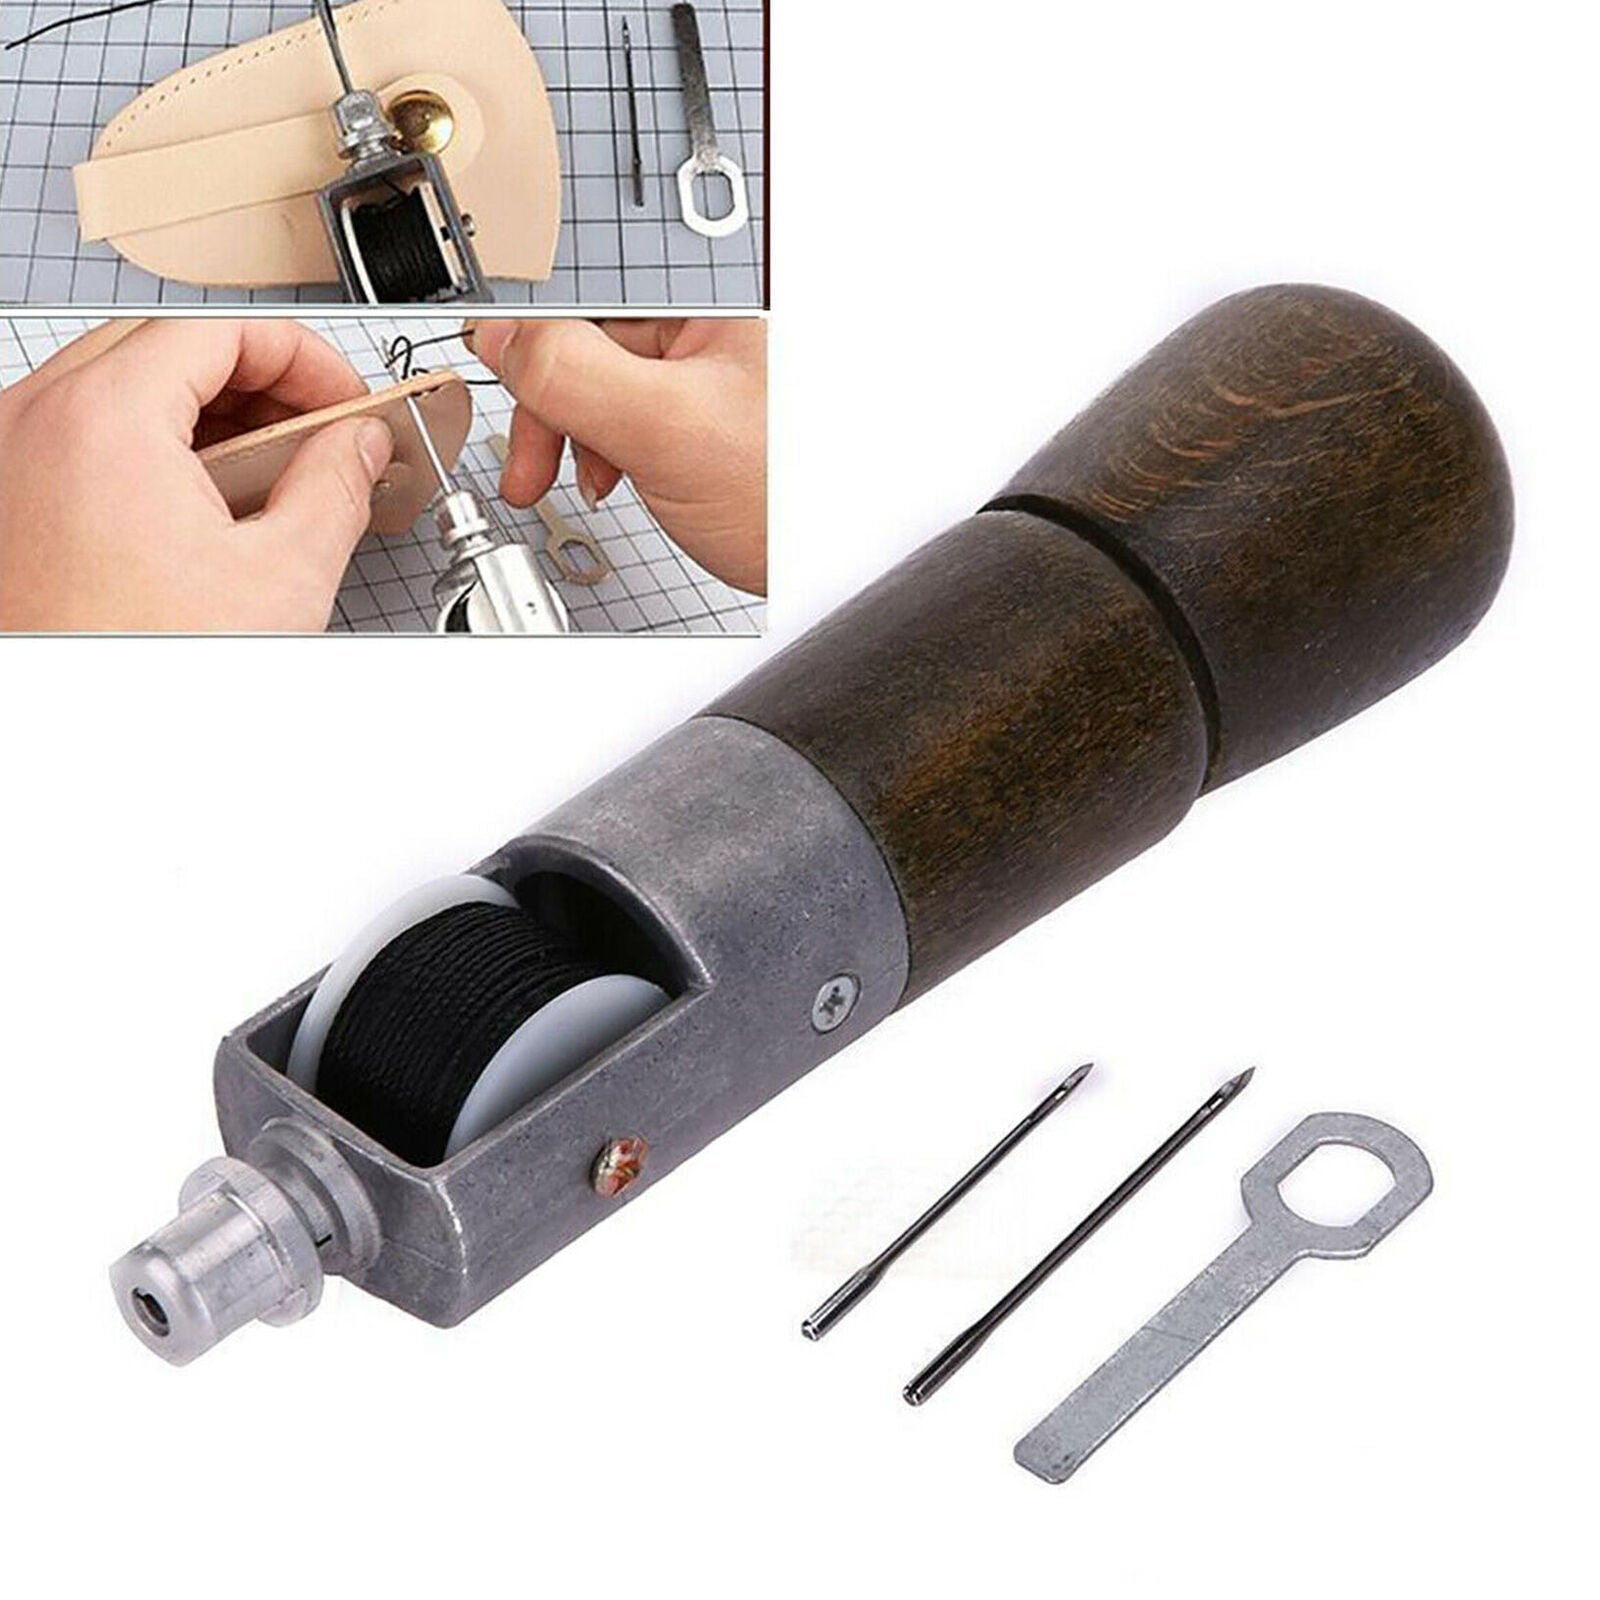 Pro Speedy Stitcher Sewing Awl Tool Kit for Leather Craft Canvas Repair Punch